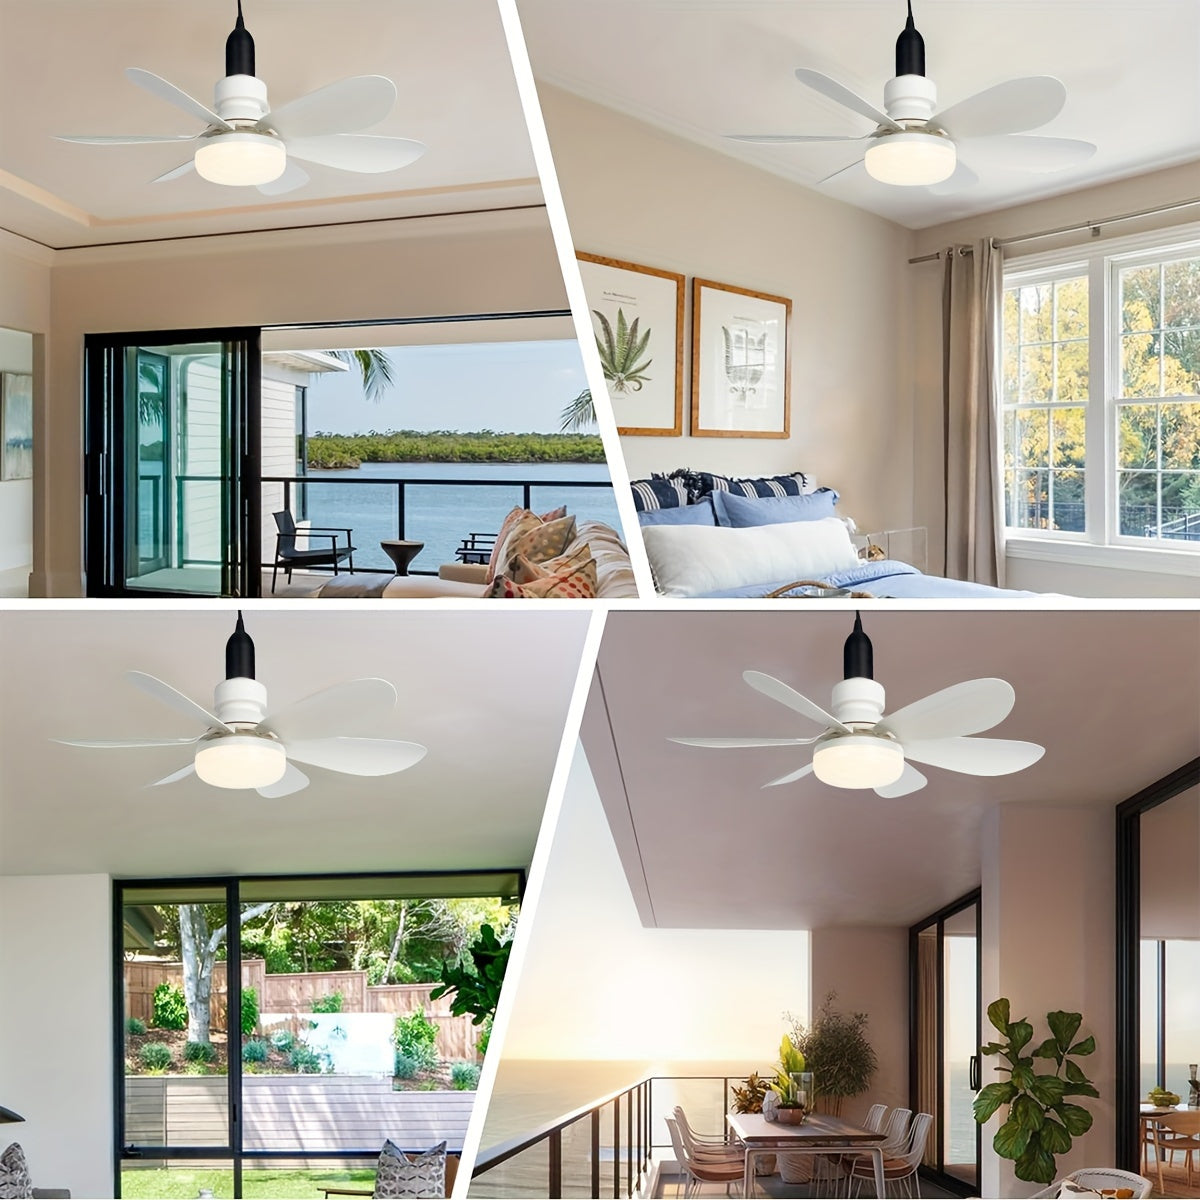 1pc Socket Fan Light, Screw Ceiling Fans With Lights And Remote, E26/E27 Easy Install Ceiling Fan, Base Small Ceiling Fan Replacement For Light Bulb, Dimmable Socket Fan Ceiling, Fan With Light For Bathroom, Bedroom, Kitchen, Living Room